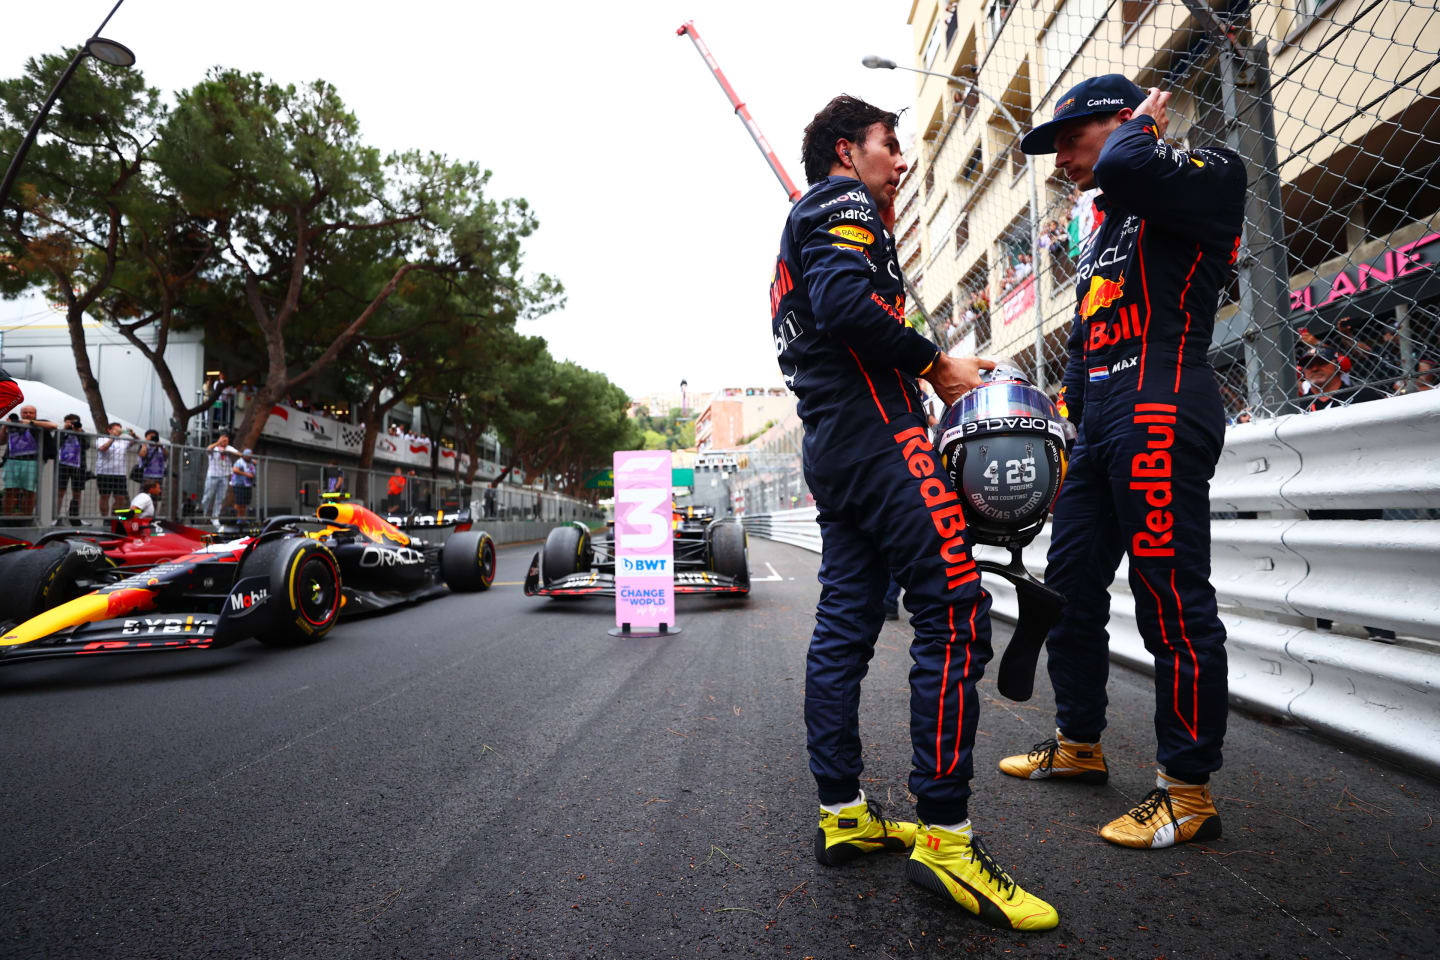 MONTE-CARLO, MONACO - MAY 29: Race winner Sergio Perez of Mexico and Oracle Red Bull Racing and Third placed Max Verstappen of the Netherlands and Oracle Red Bull Racing talk in parc ferme during the F1 Grand Prix of Monaco at Circuit de Monaco on May 29, 2022 in Monte-Carlo, Monaco. (Photo by Dan Istitene - Formula 1/Formula 1 via Getty Images)